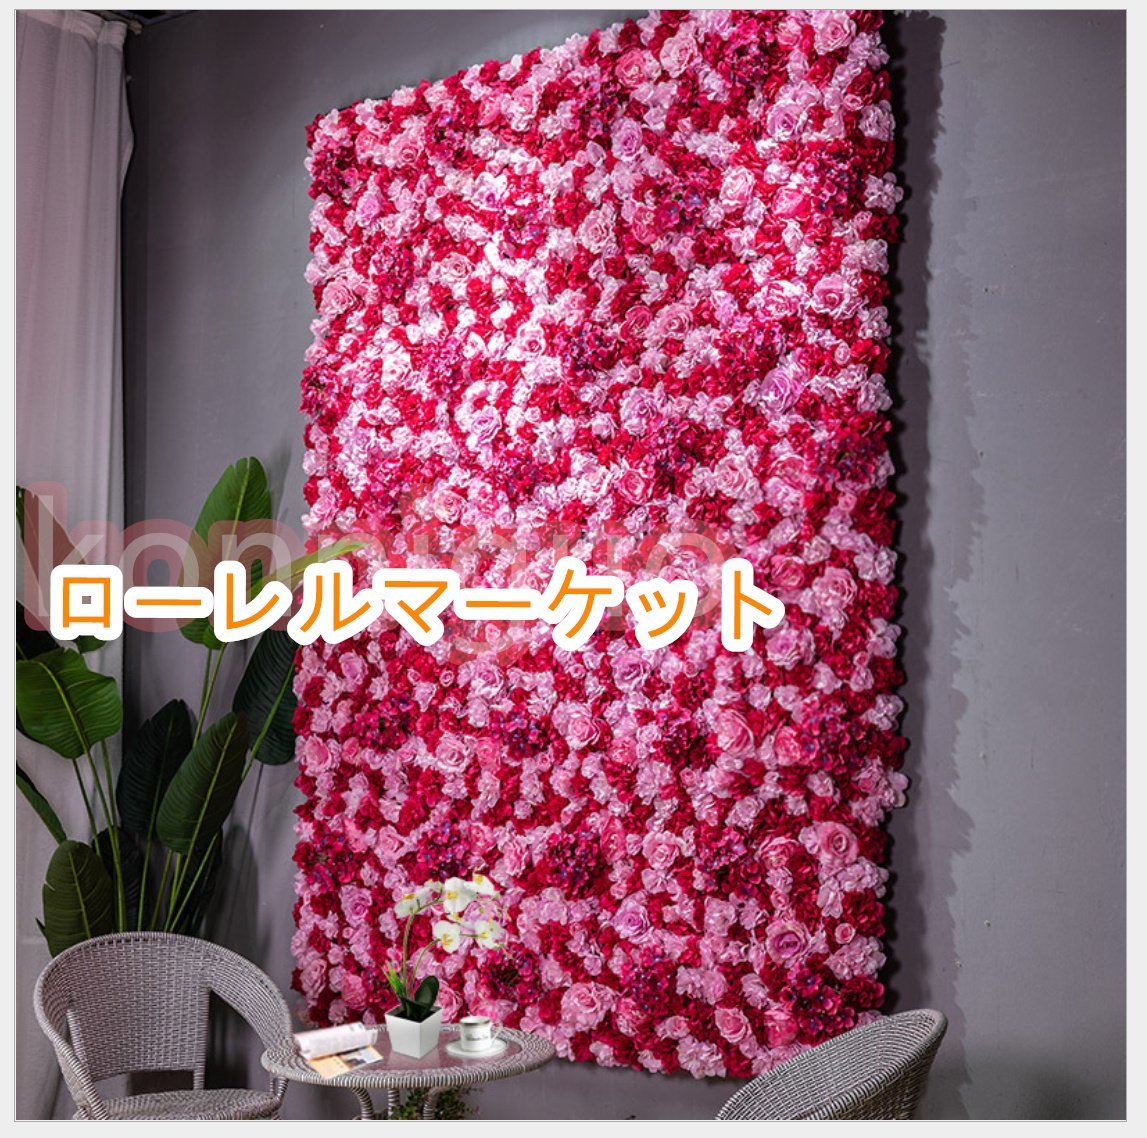  human work flower. wall wall equipment ornament silk flower background equipment ornament wedding place. interior approximately 60 * 40cm human work flower. wall 40*60cm 4 piece set T2CP87